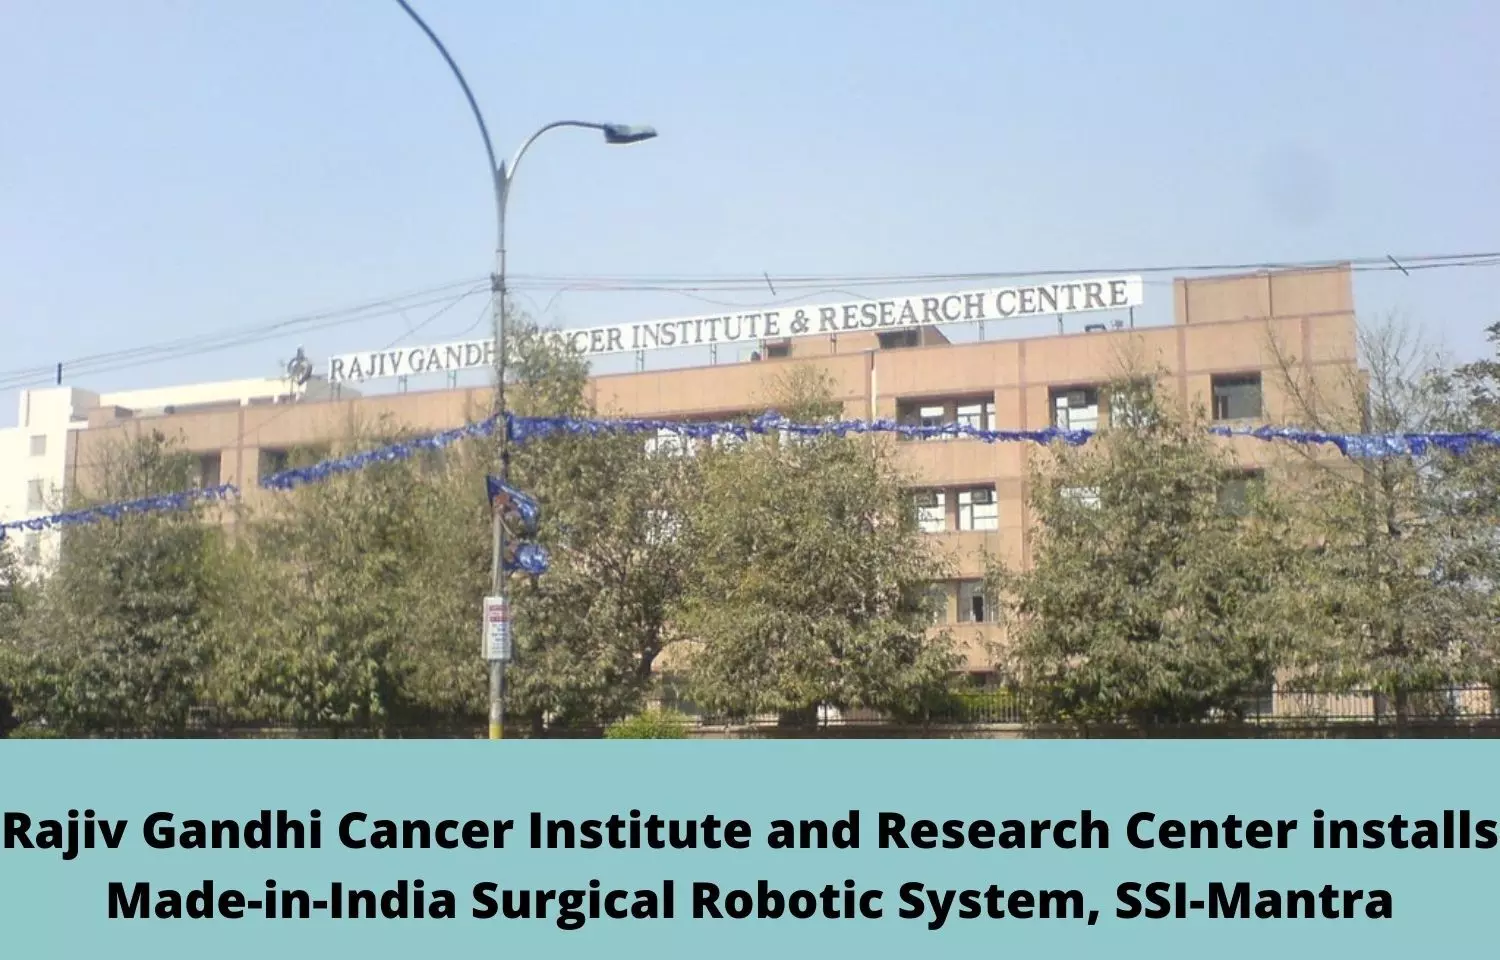 Rajiv Gandhi Cancer Institute and Research Center installs Made-in-India Surgical Robotic System, SSI-Mantra